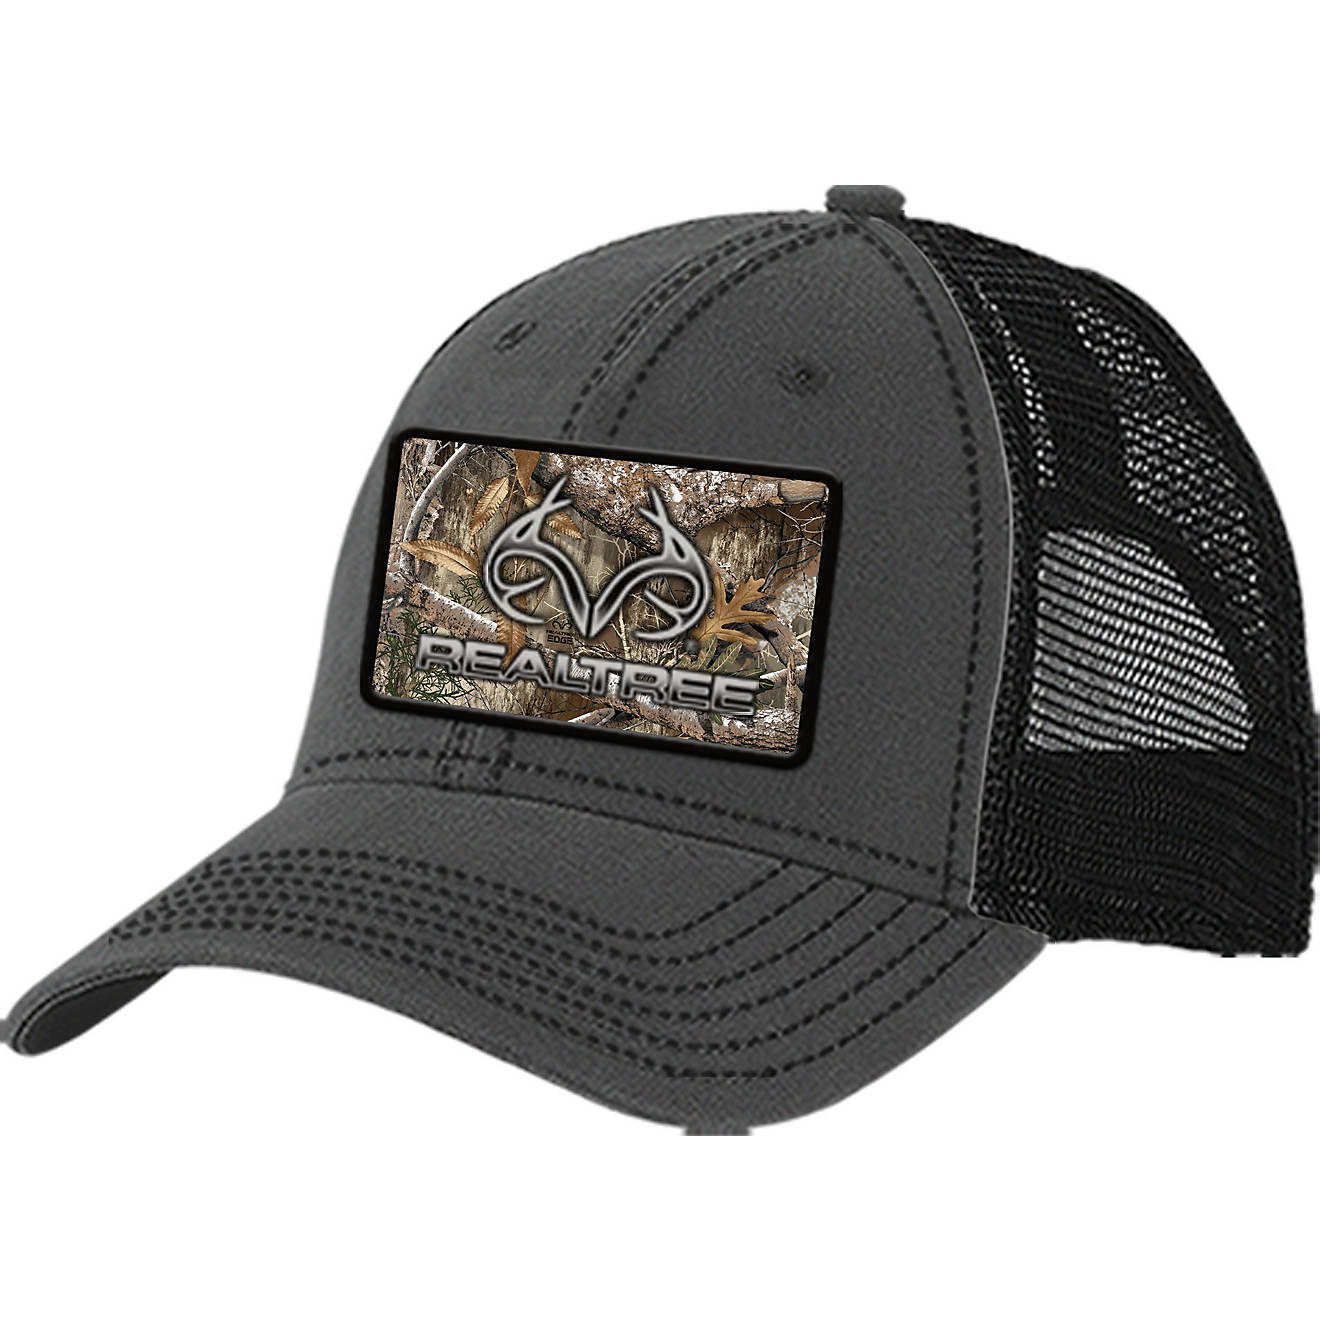 Realtree Men's Promo Antler Camo Patch Cap                                                                                       - view number 1